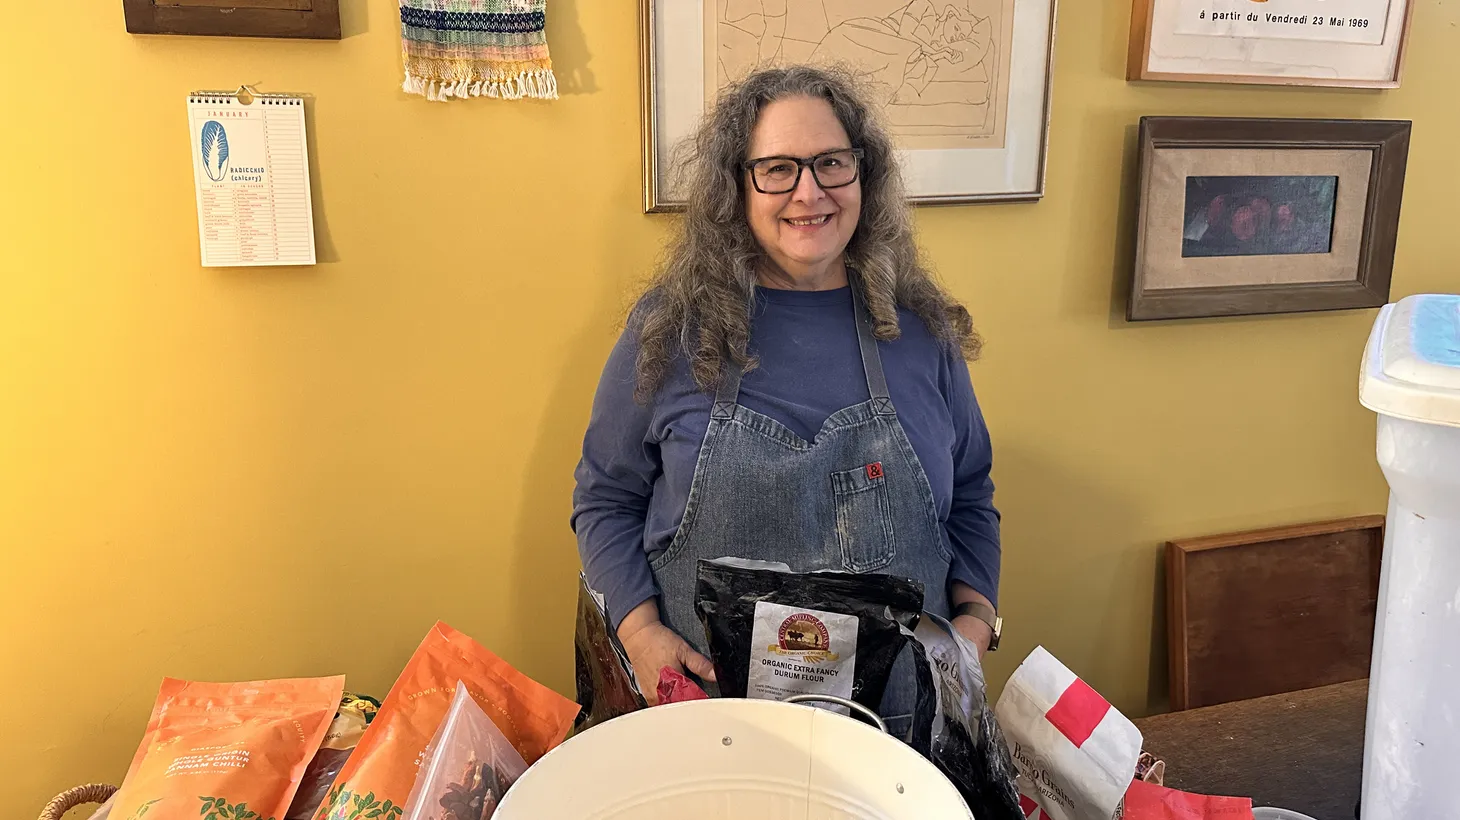 Good Food host Evan Kleiman is victorious after sorting through the many flours in her pantry.